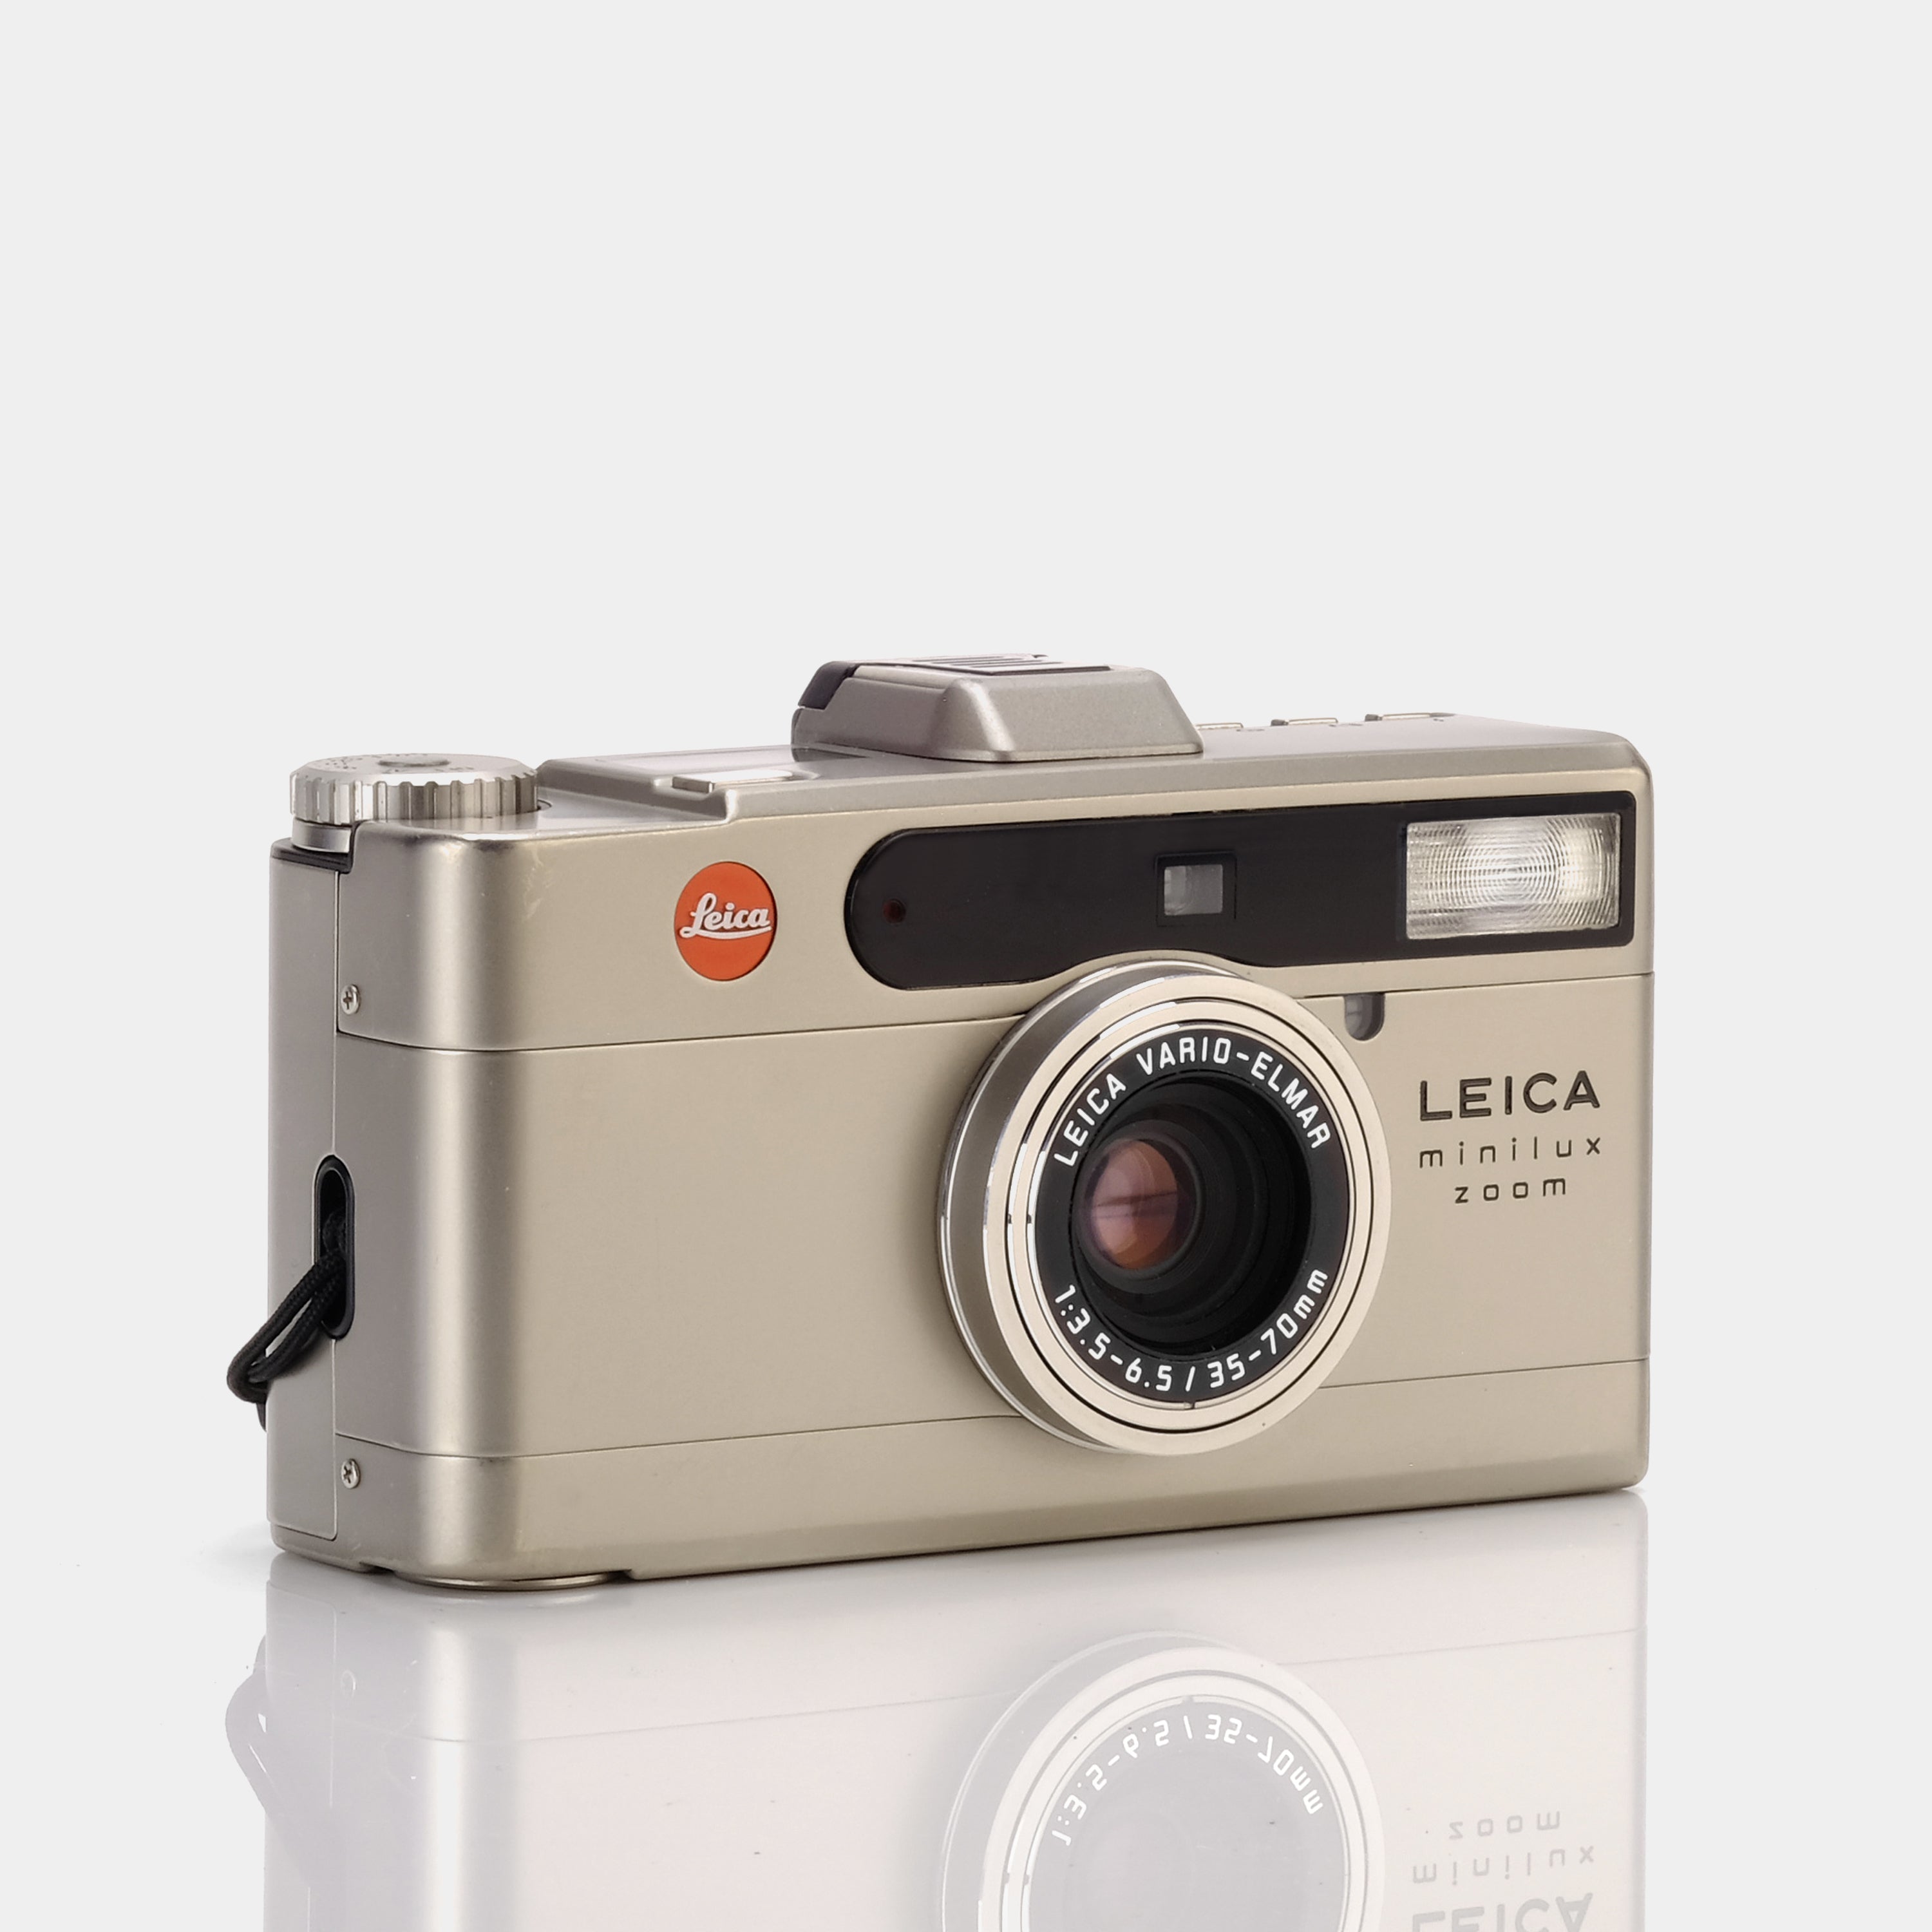 Leica Minilux Zoom 35mm Point and Shoot Film Camera